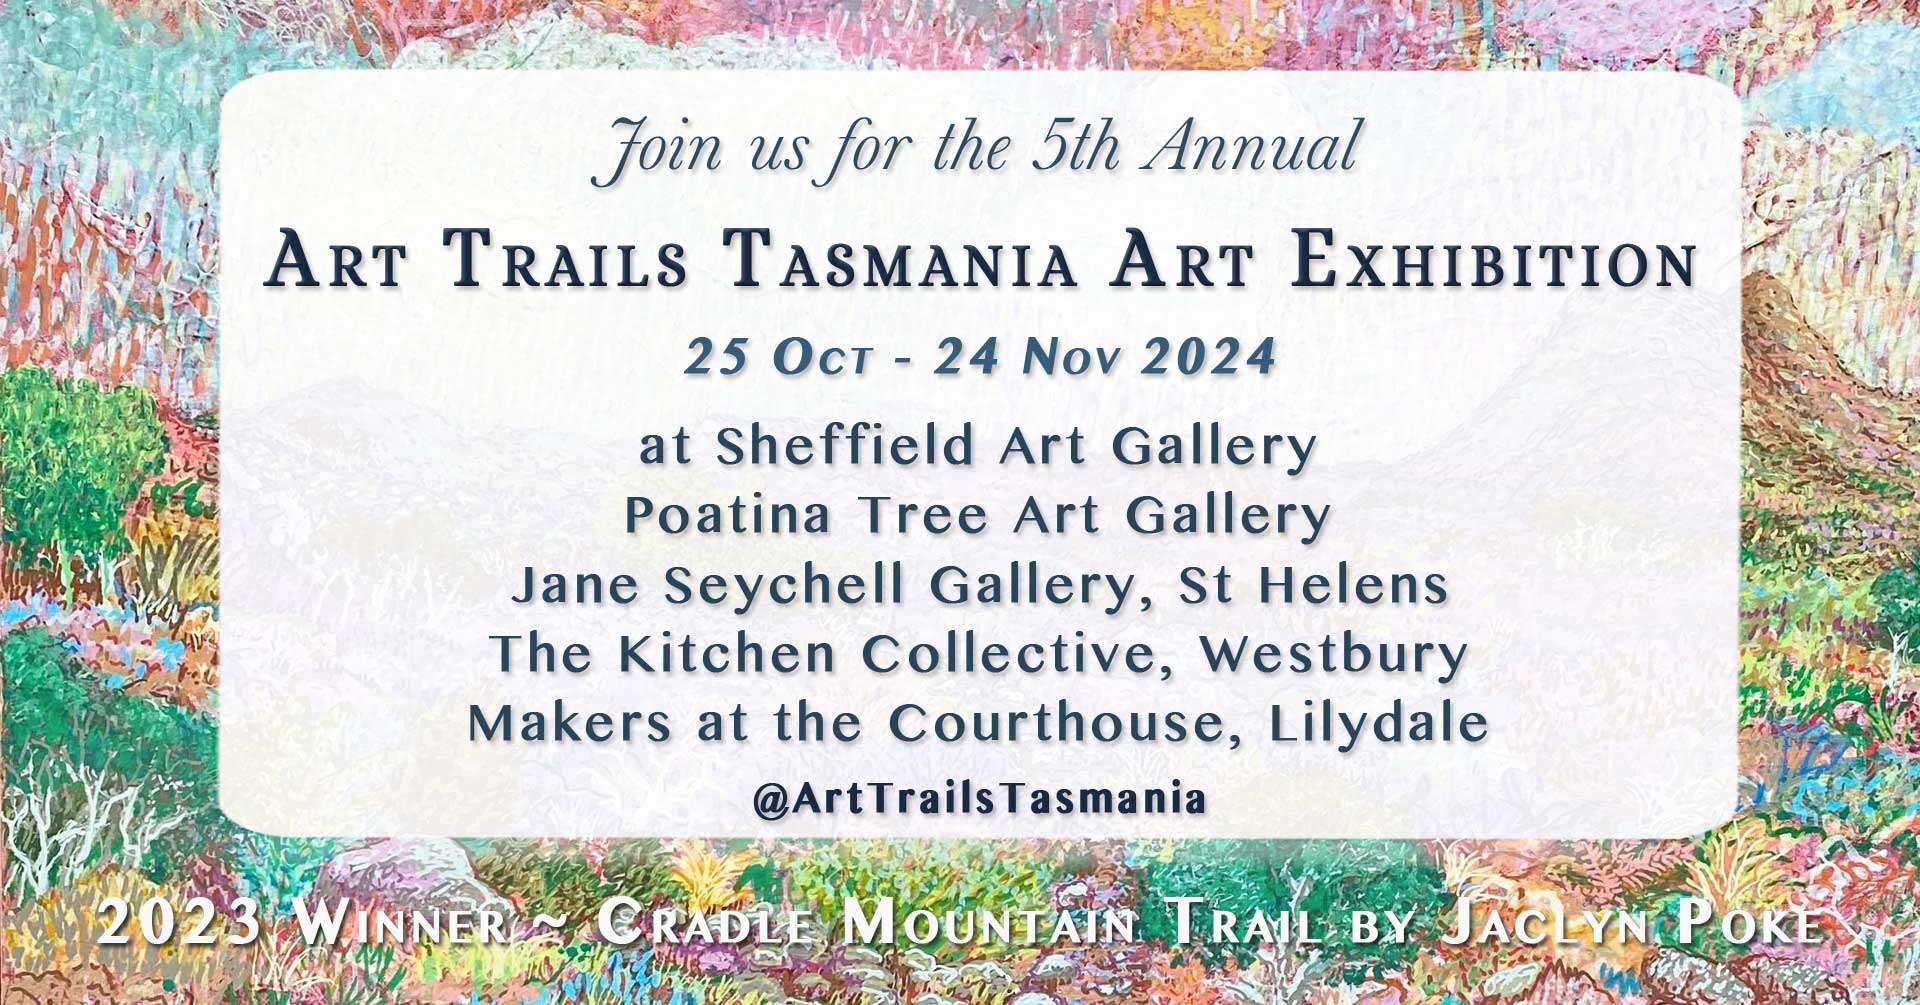 Image shows a background of a contemporary oil painting in pinks, blues, greens and oranges with the text reading You're Invited to join us for the 5th Annual Art Trails Tasmania Art Exhibition at the galleries Sheffield Art Gallery, Poatina Tree Art Gallery, Jane Seychell Gallery St Helens, The Kitchen Collective Westbury Makers at the Courthouse Lilydale 24 October to 25 November 2024 2023 Winner Jacklyn Poke